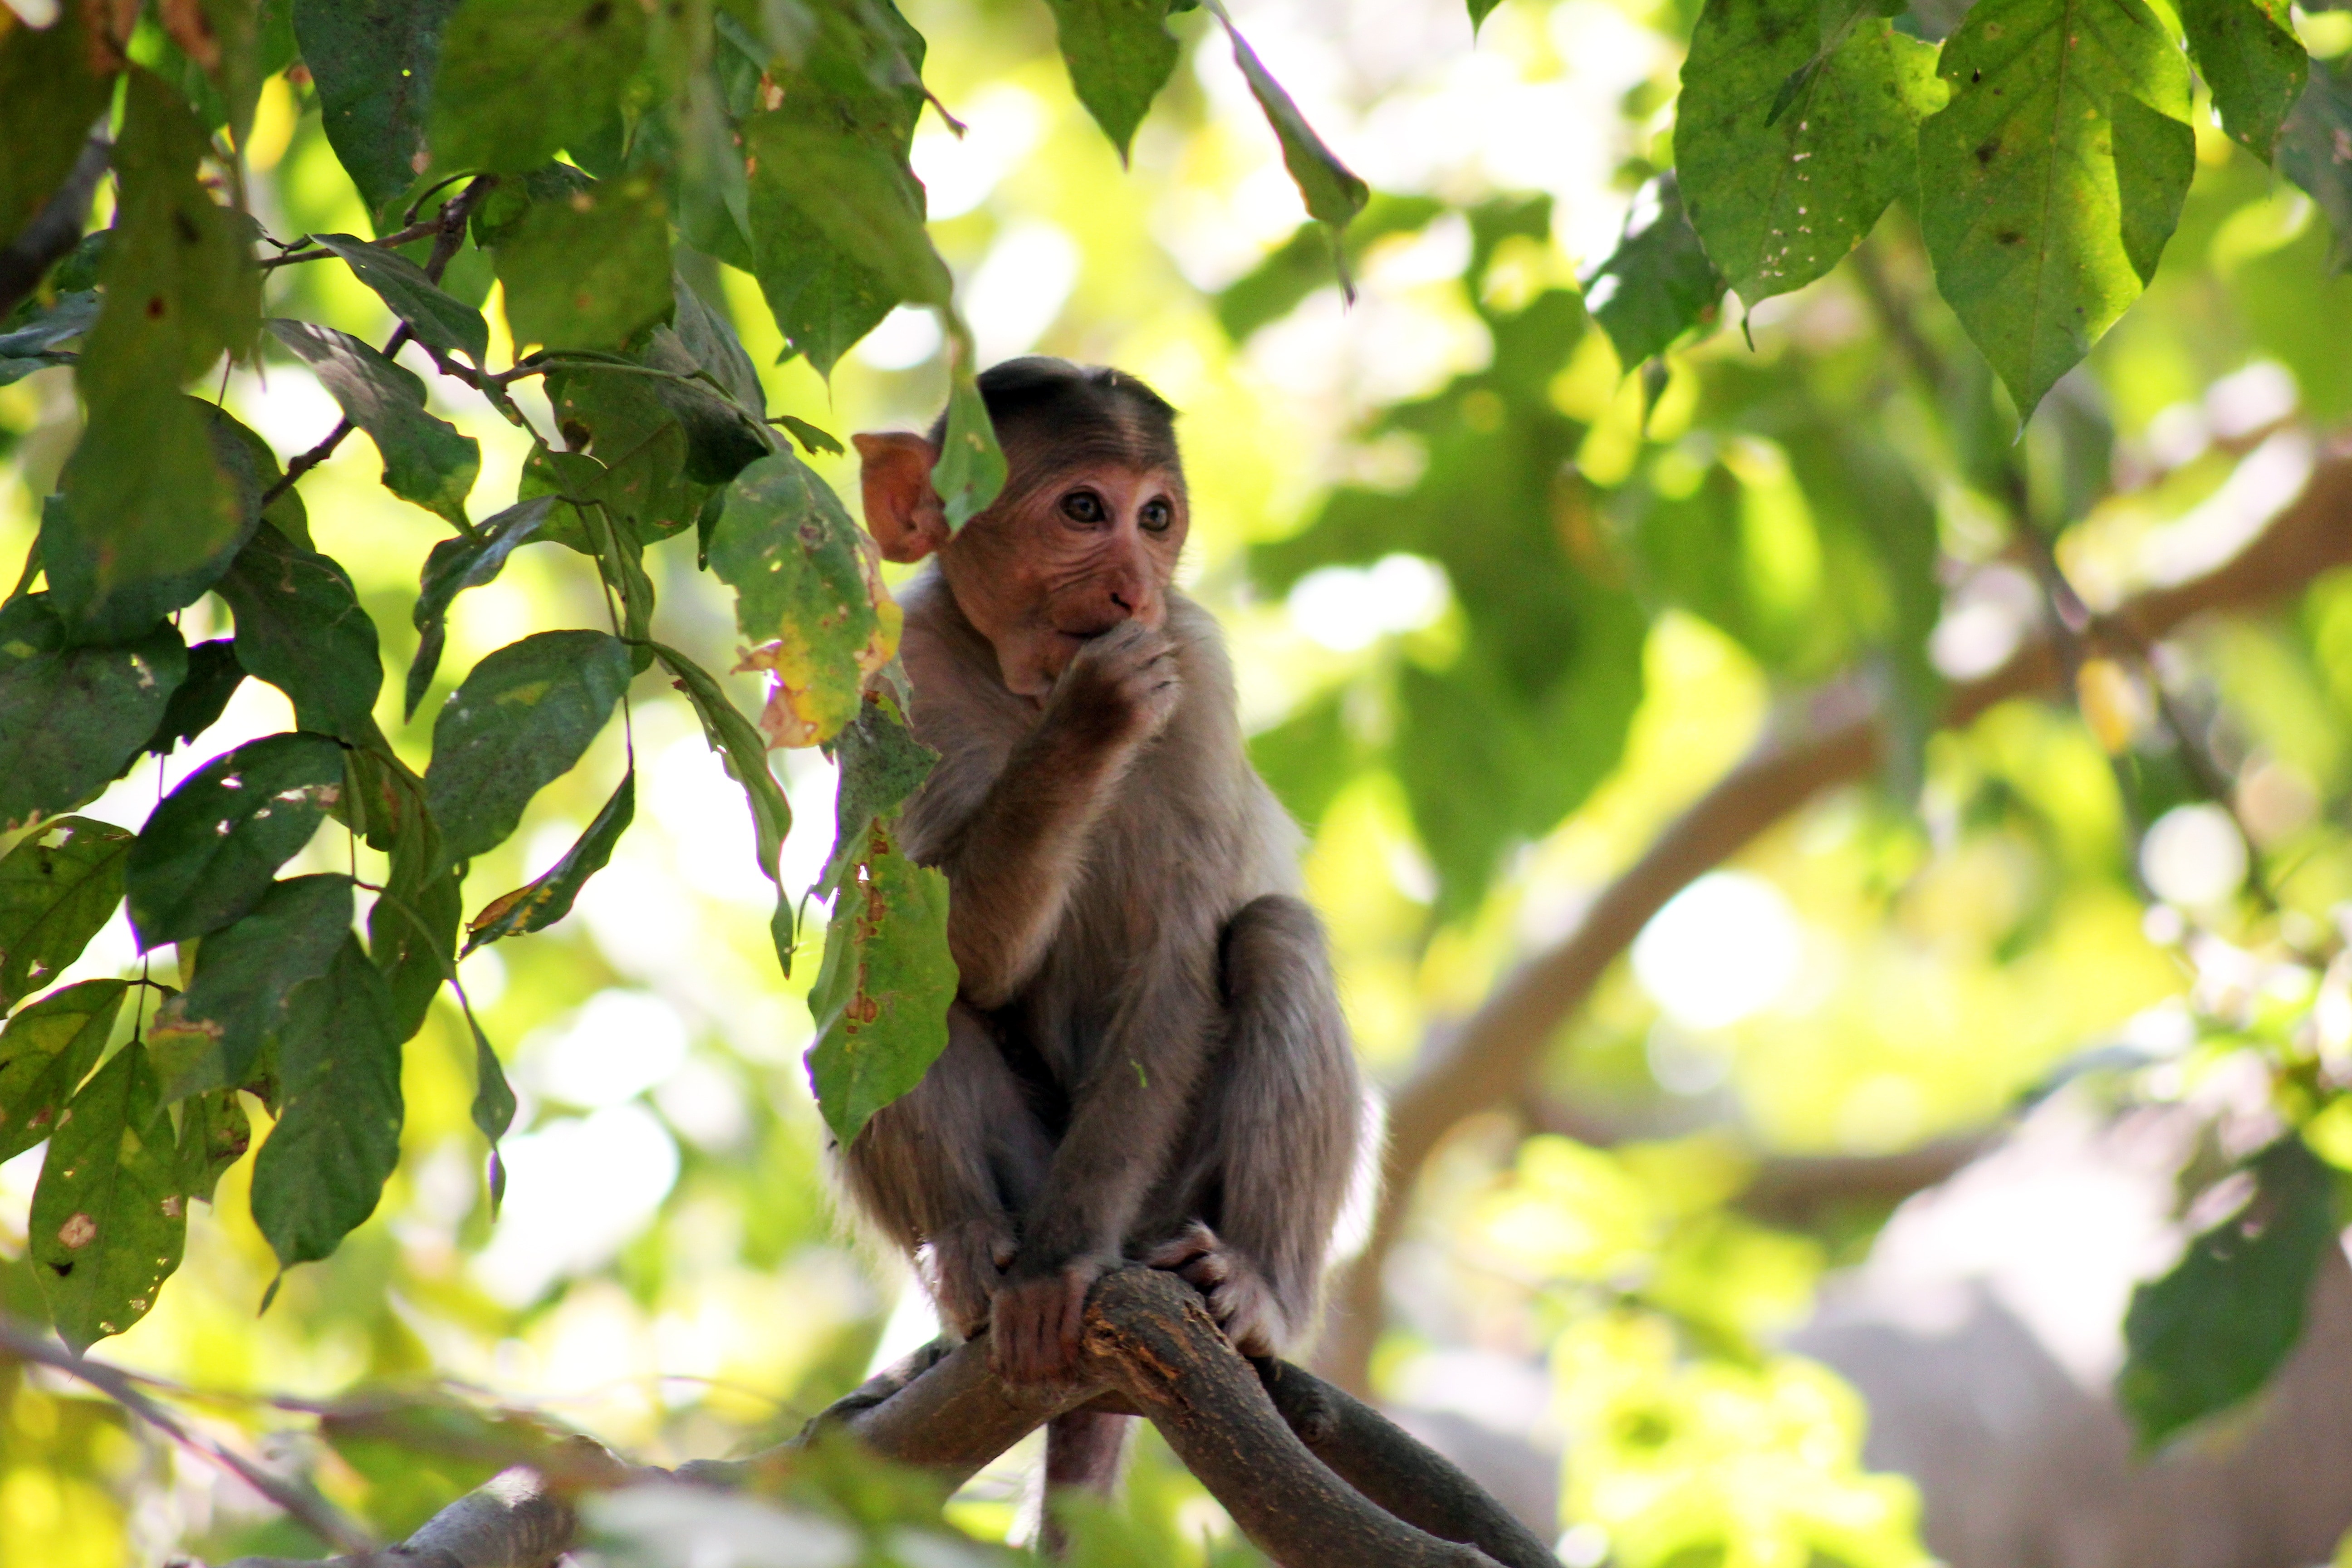 gray small monkey perched in tree during daytime